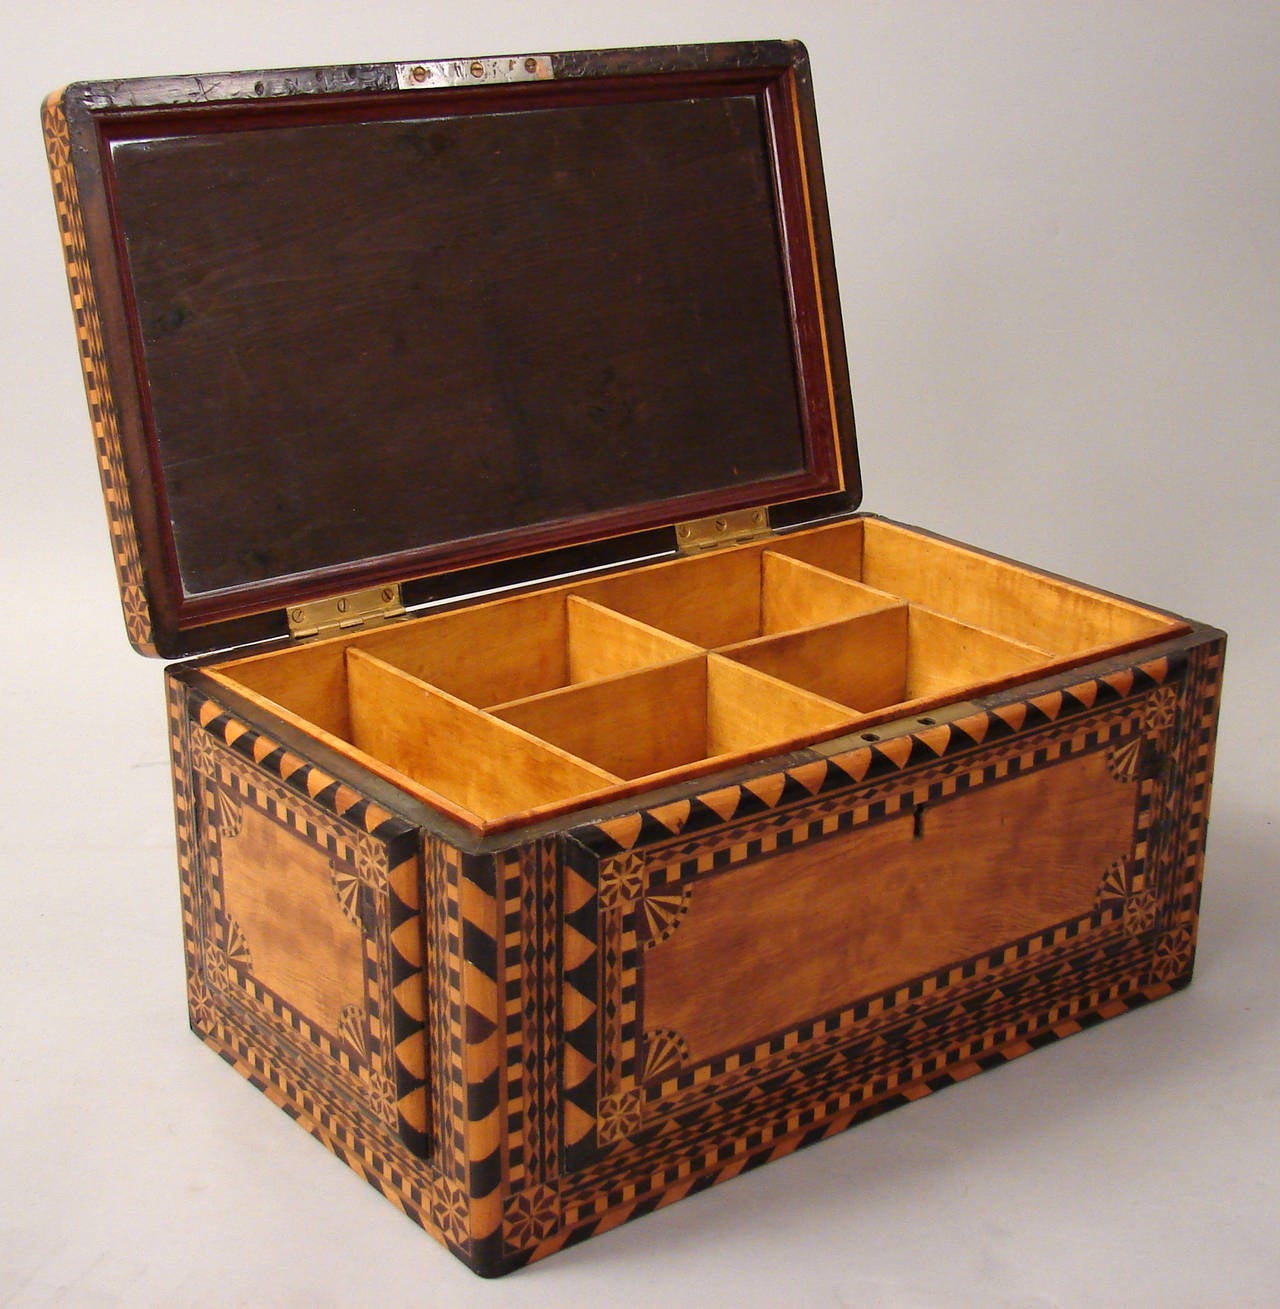 A fine quality Northern European inlaid satinwood jewelry box of impressive scale, the interior with a removable divided tray and a mirror inset in the lid,
the box elaborately inlaid in a geometric patter, circa 1850-1880.